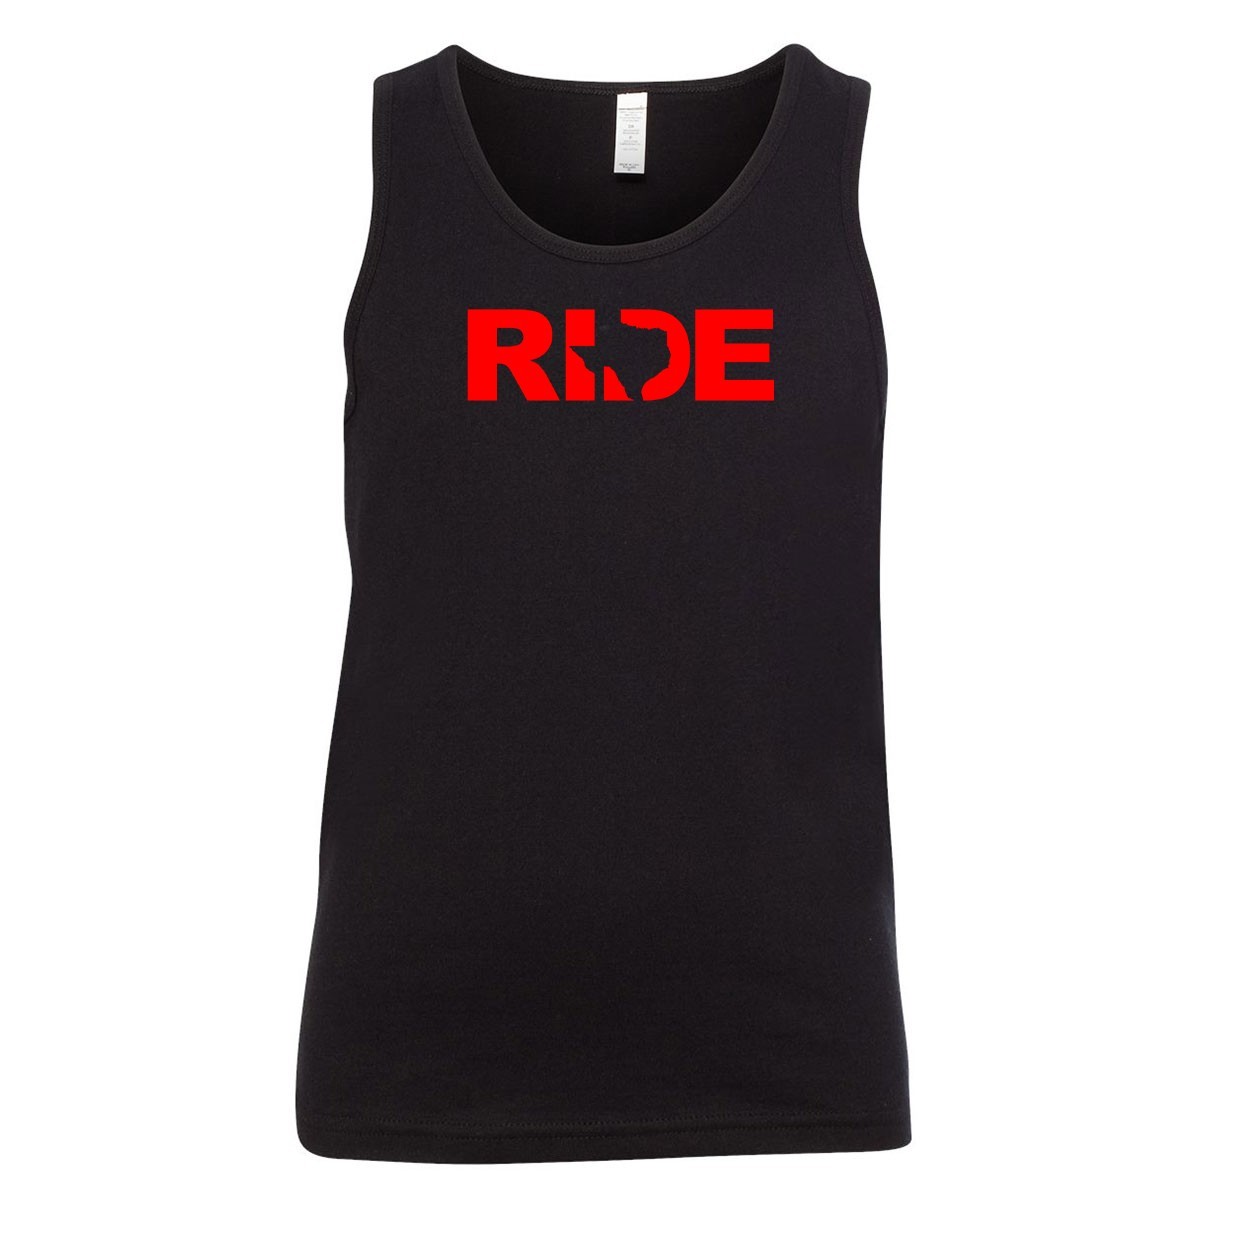 Ride Texas Classic Youth Unisex Tank Top Black (Red Logo)